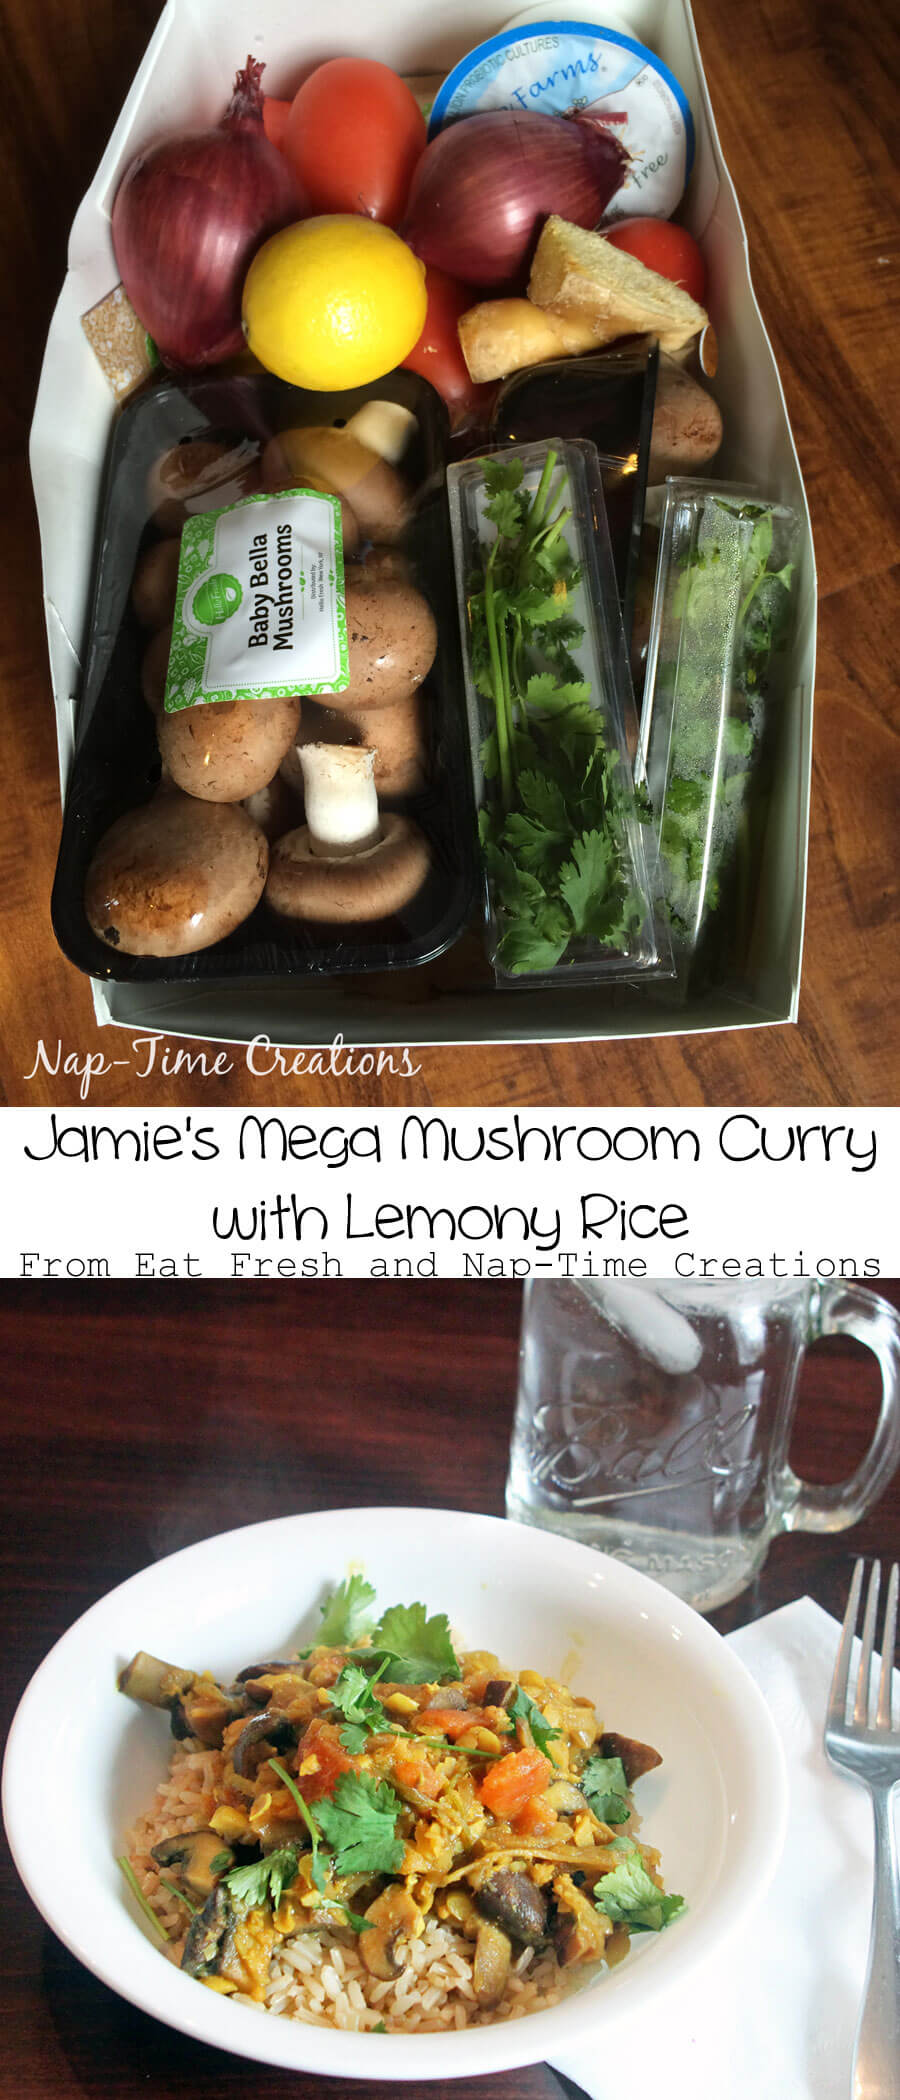 Jamies-Mega-Mushoom-&Lentil-Curry-with-Lemony-Rice-from-Nap-Time-Creations-and-HelloFresh-